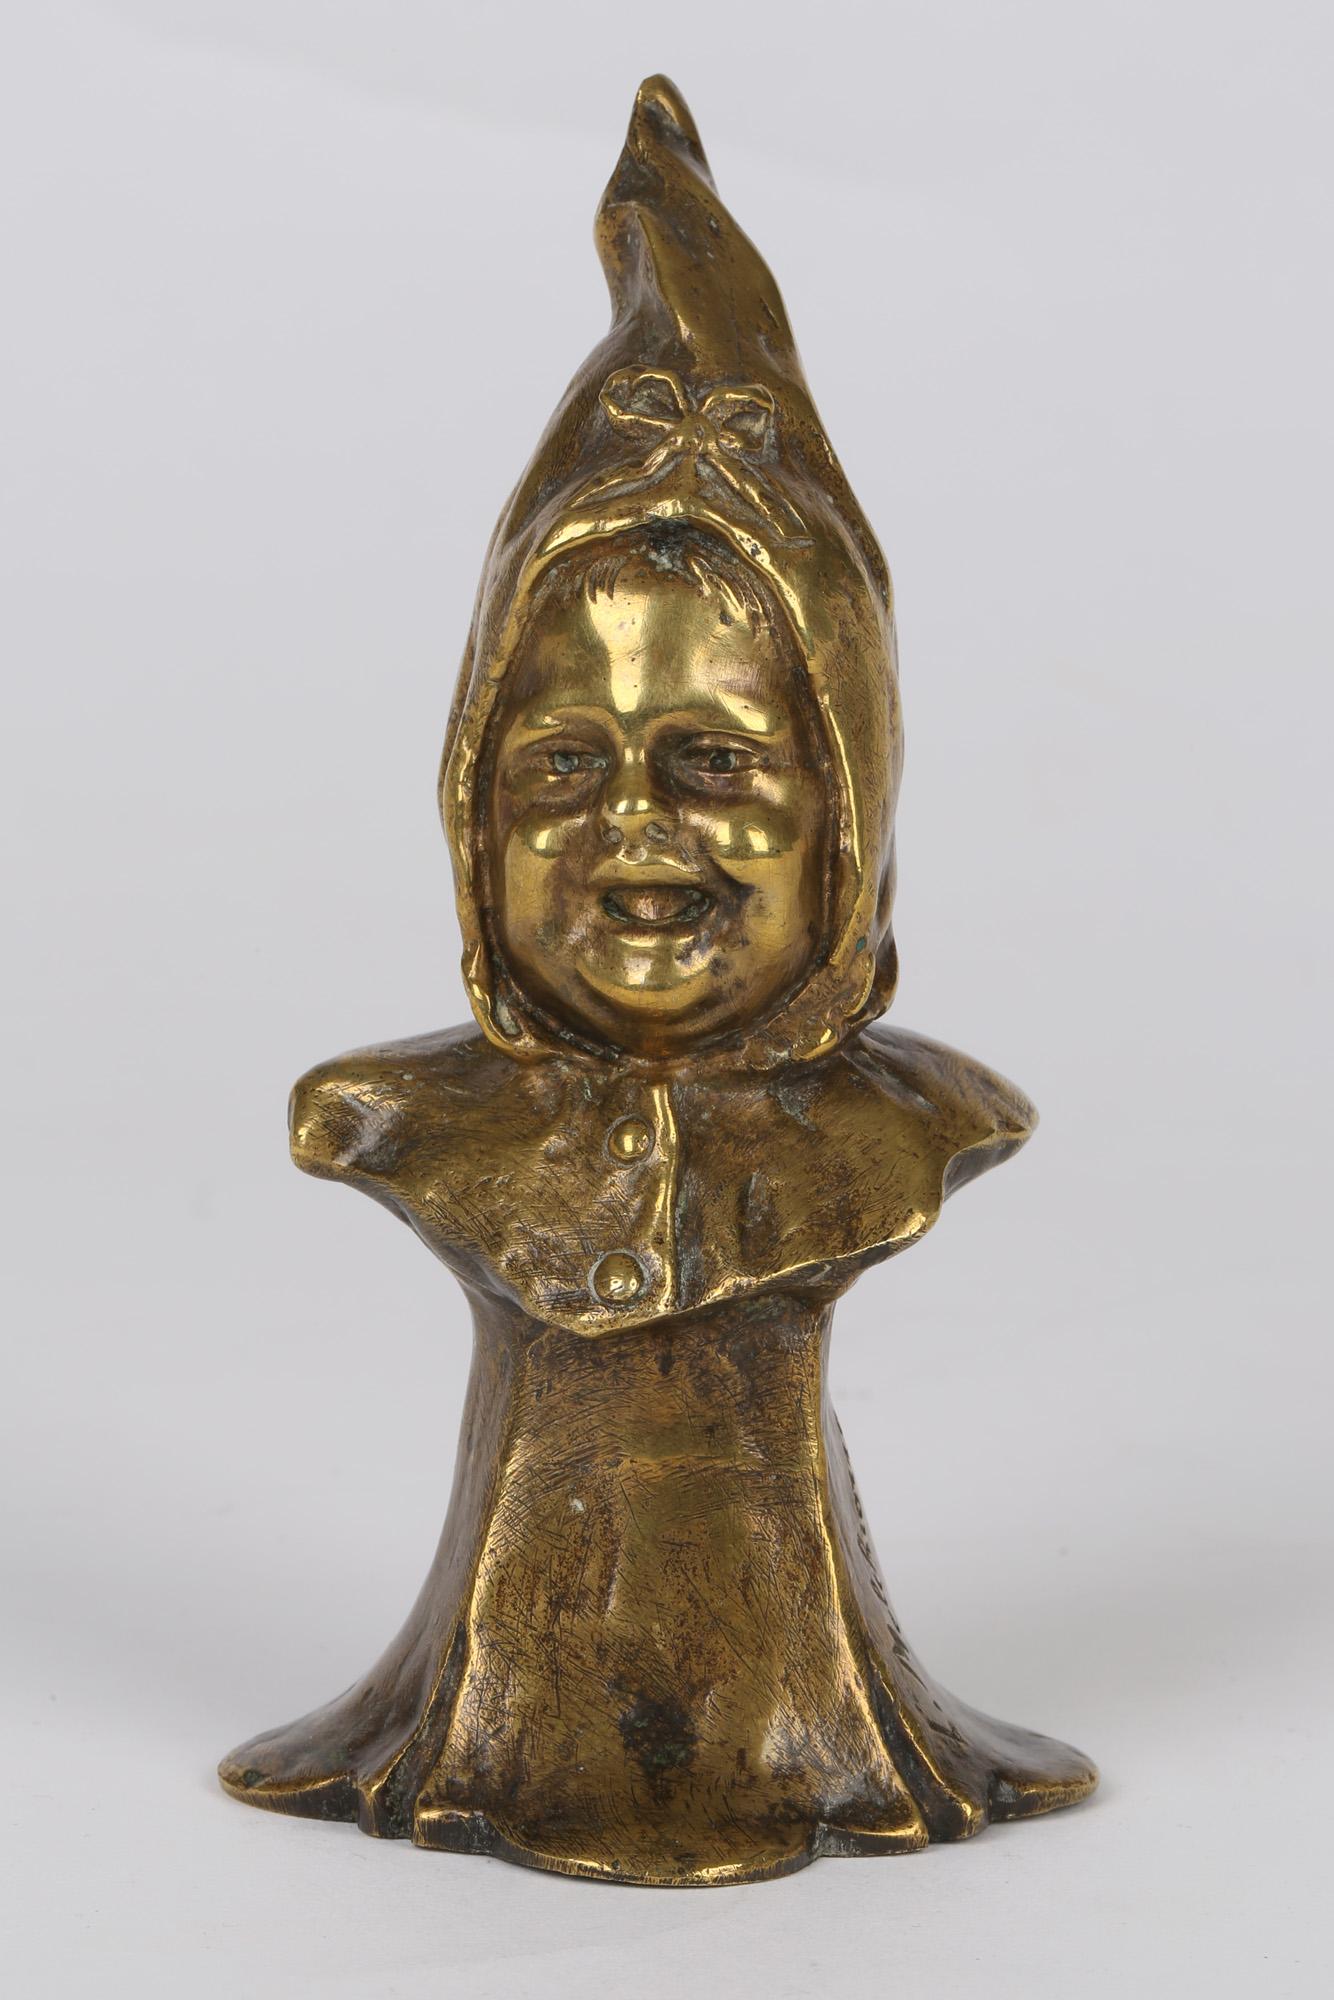 A fine antique Italian gilded bronze sculptural bust of a young child wearing a bonnet signed by Luigi Melchiorre (1859-c.1908). The bust sits on a draped integral pedestal and portrays a well detailed head of a young child wearing a buttoned collar